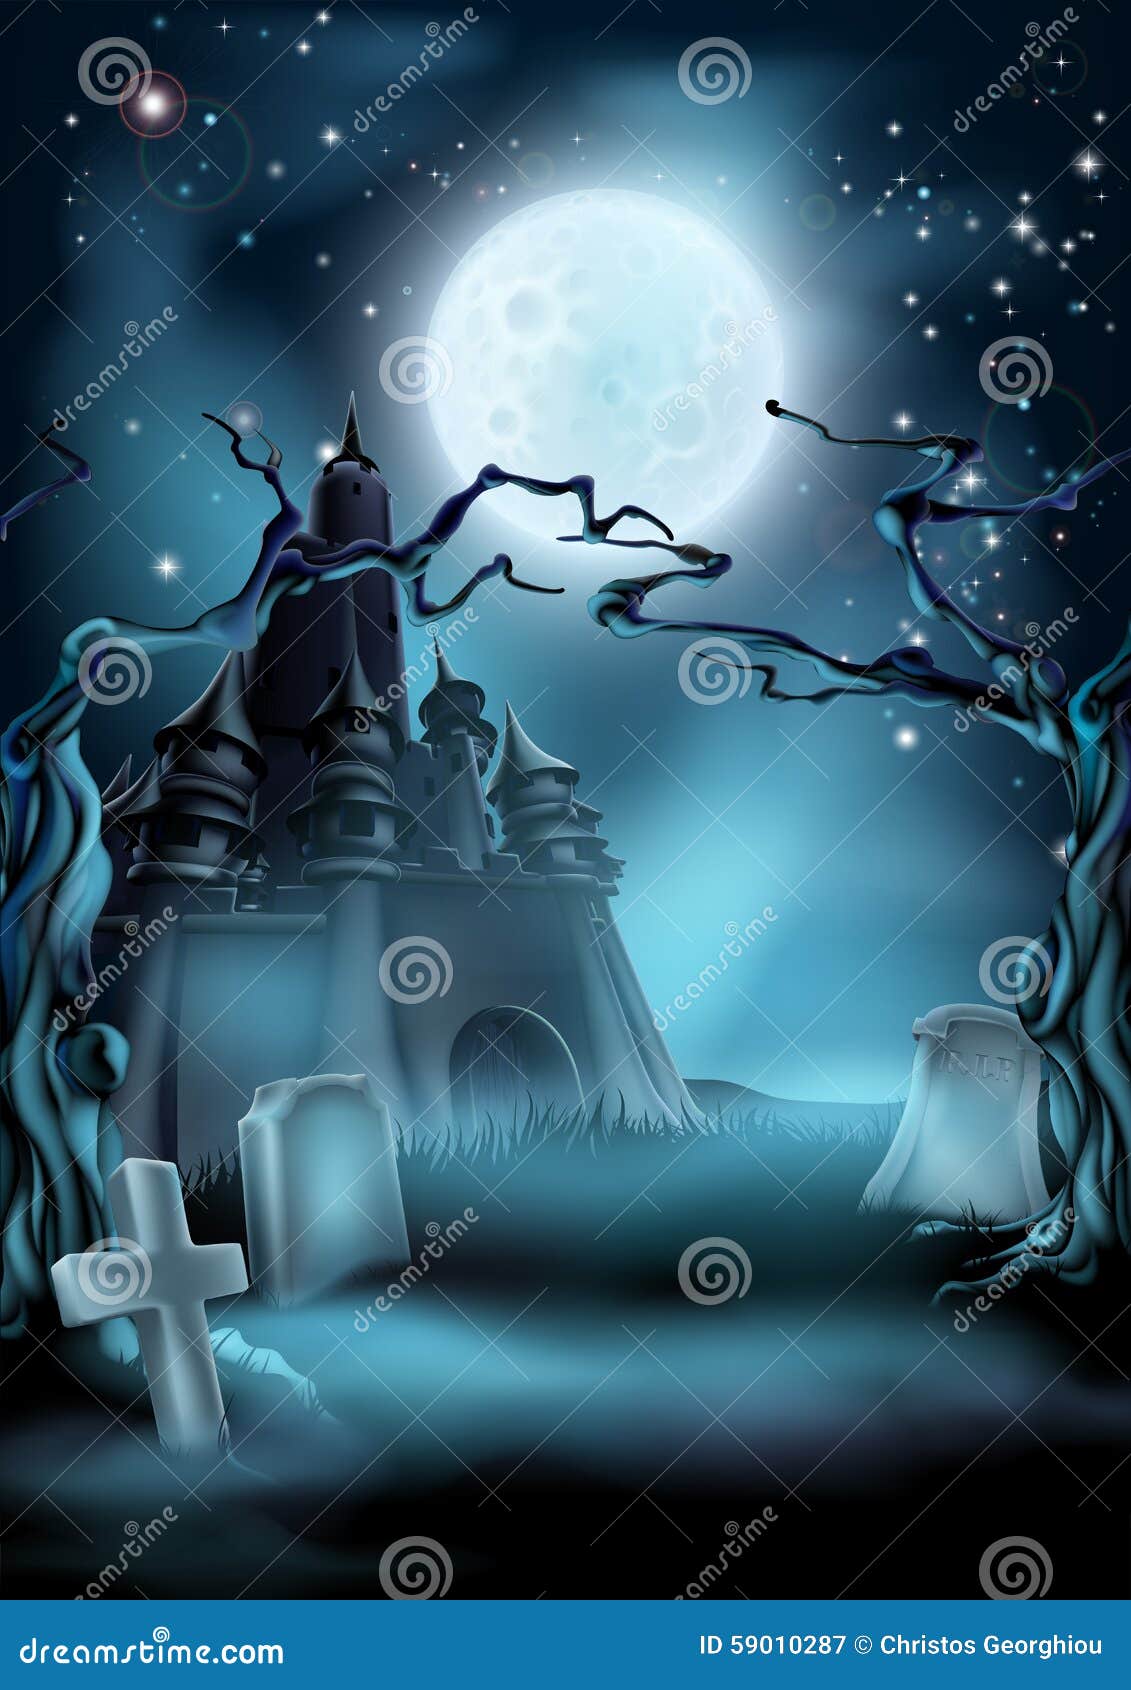 graveyard and castle halloween background